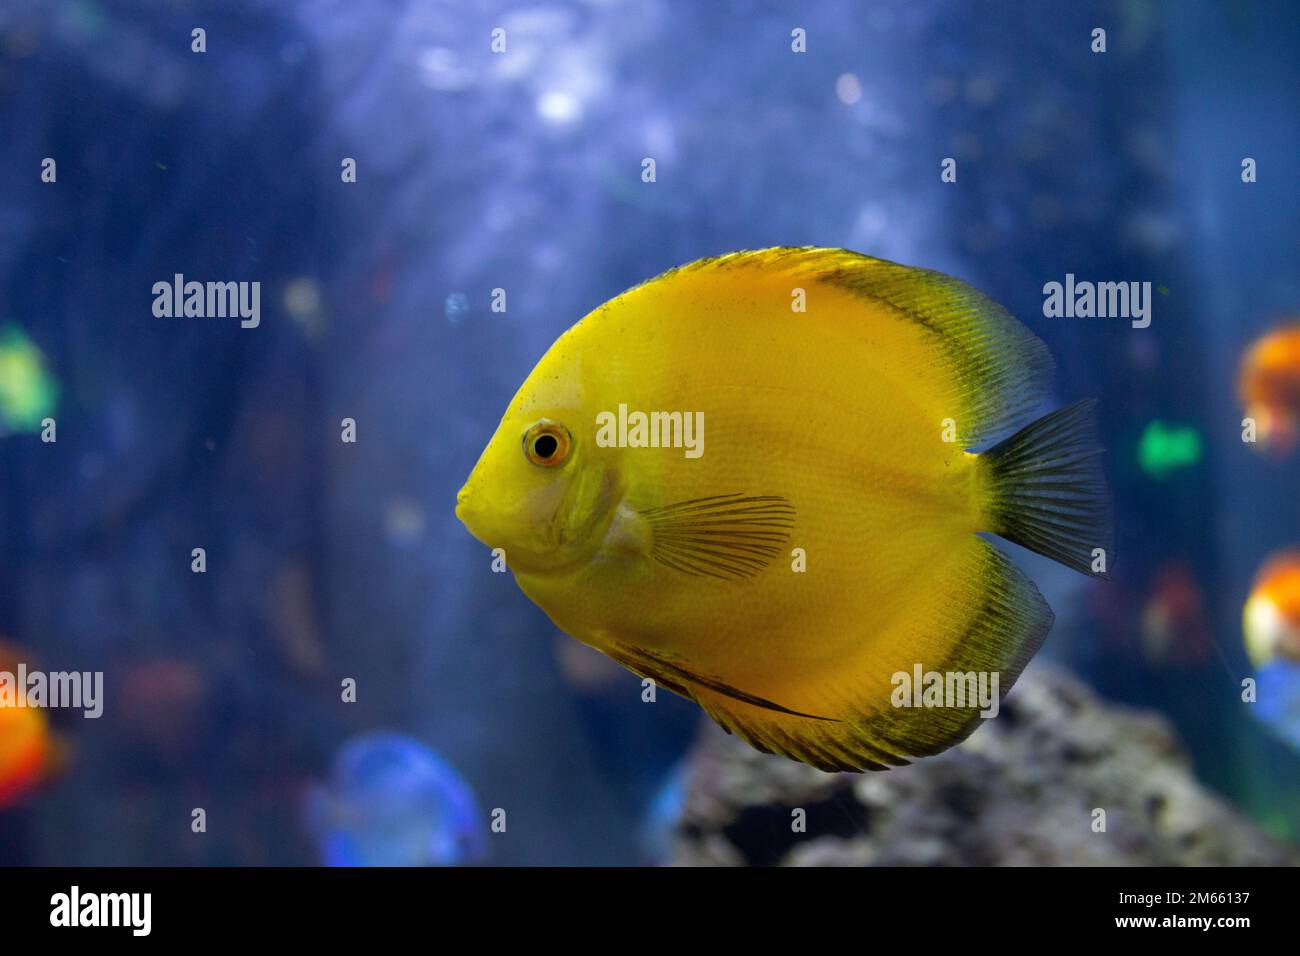 Colorful of coral reef fish with tree and plant ecosystem in an aquarium Stock Photo